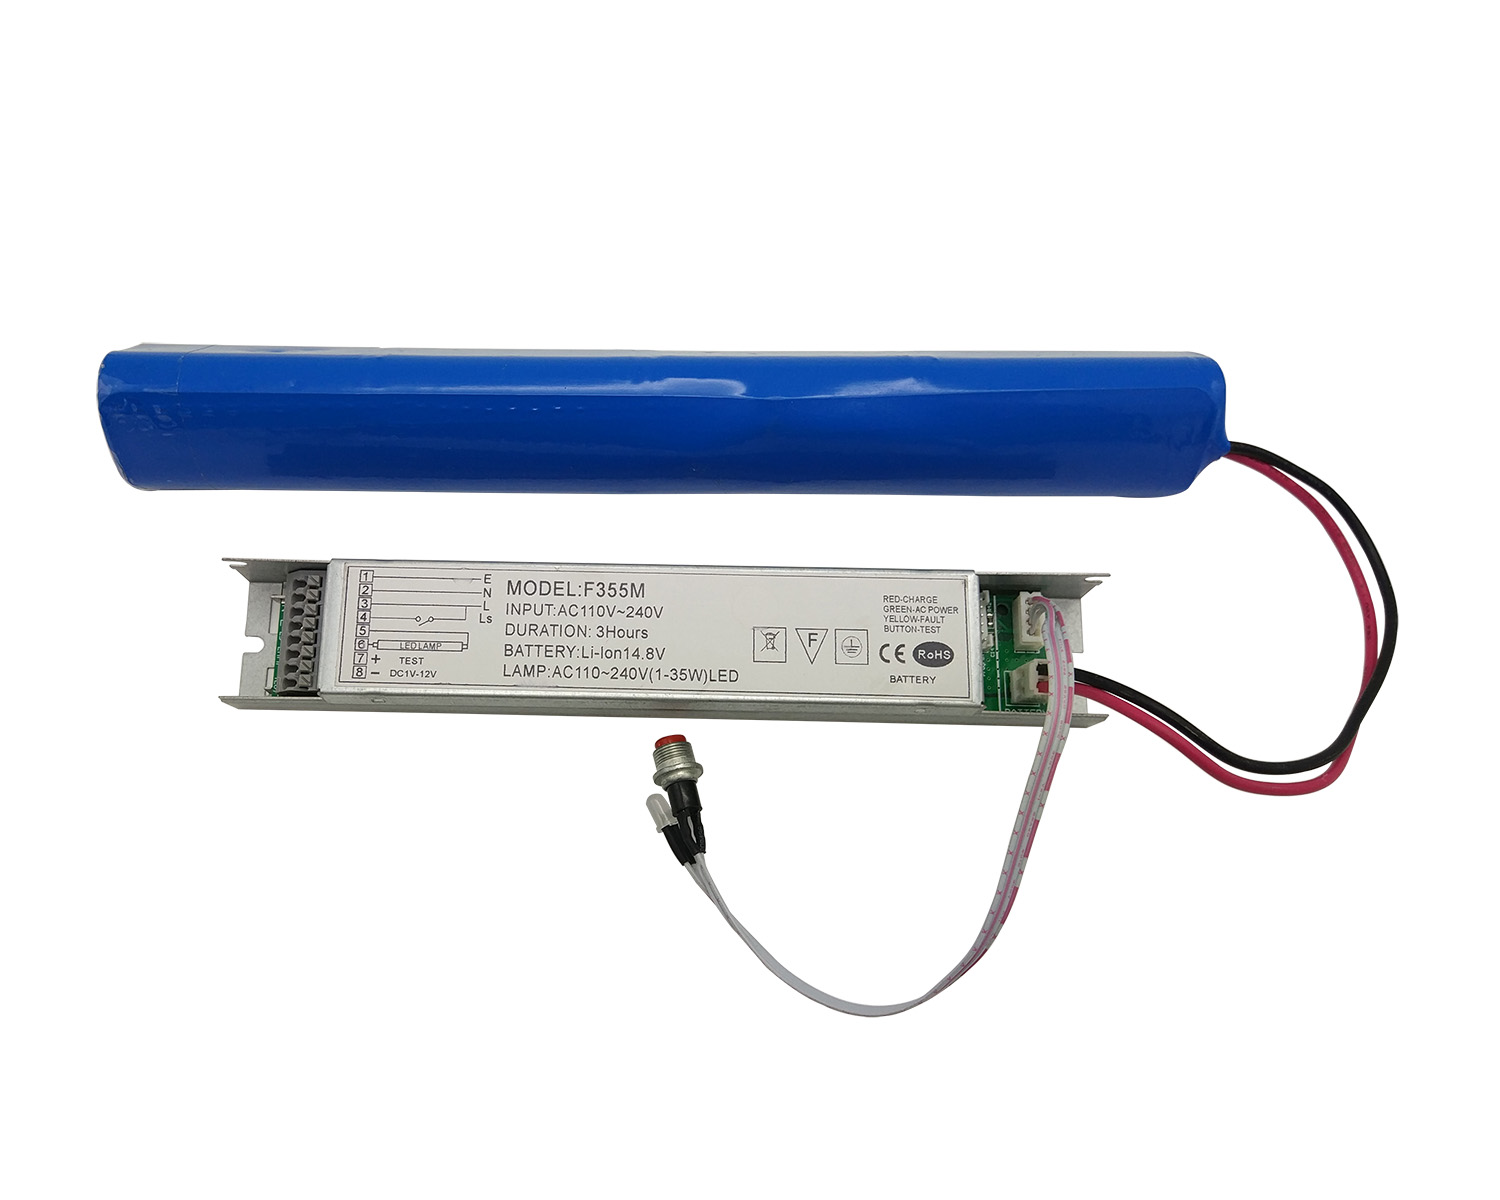 Auto test Emergency Power Source For 1-45w LED Lamps